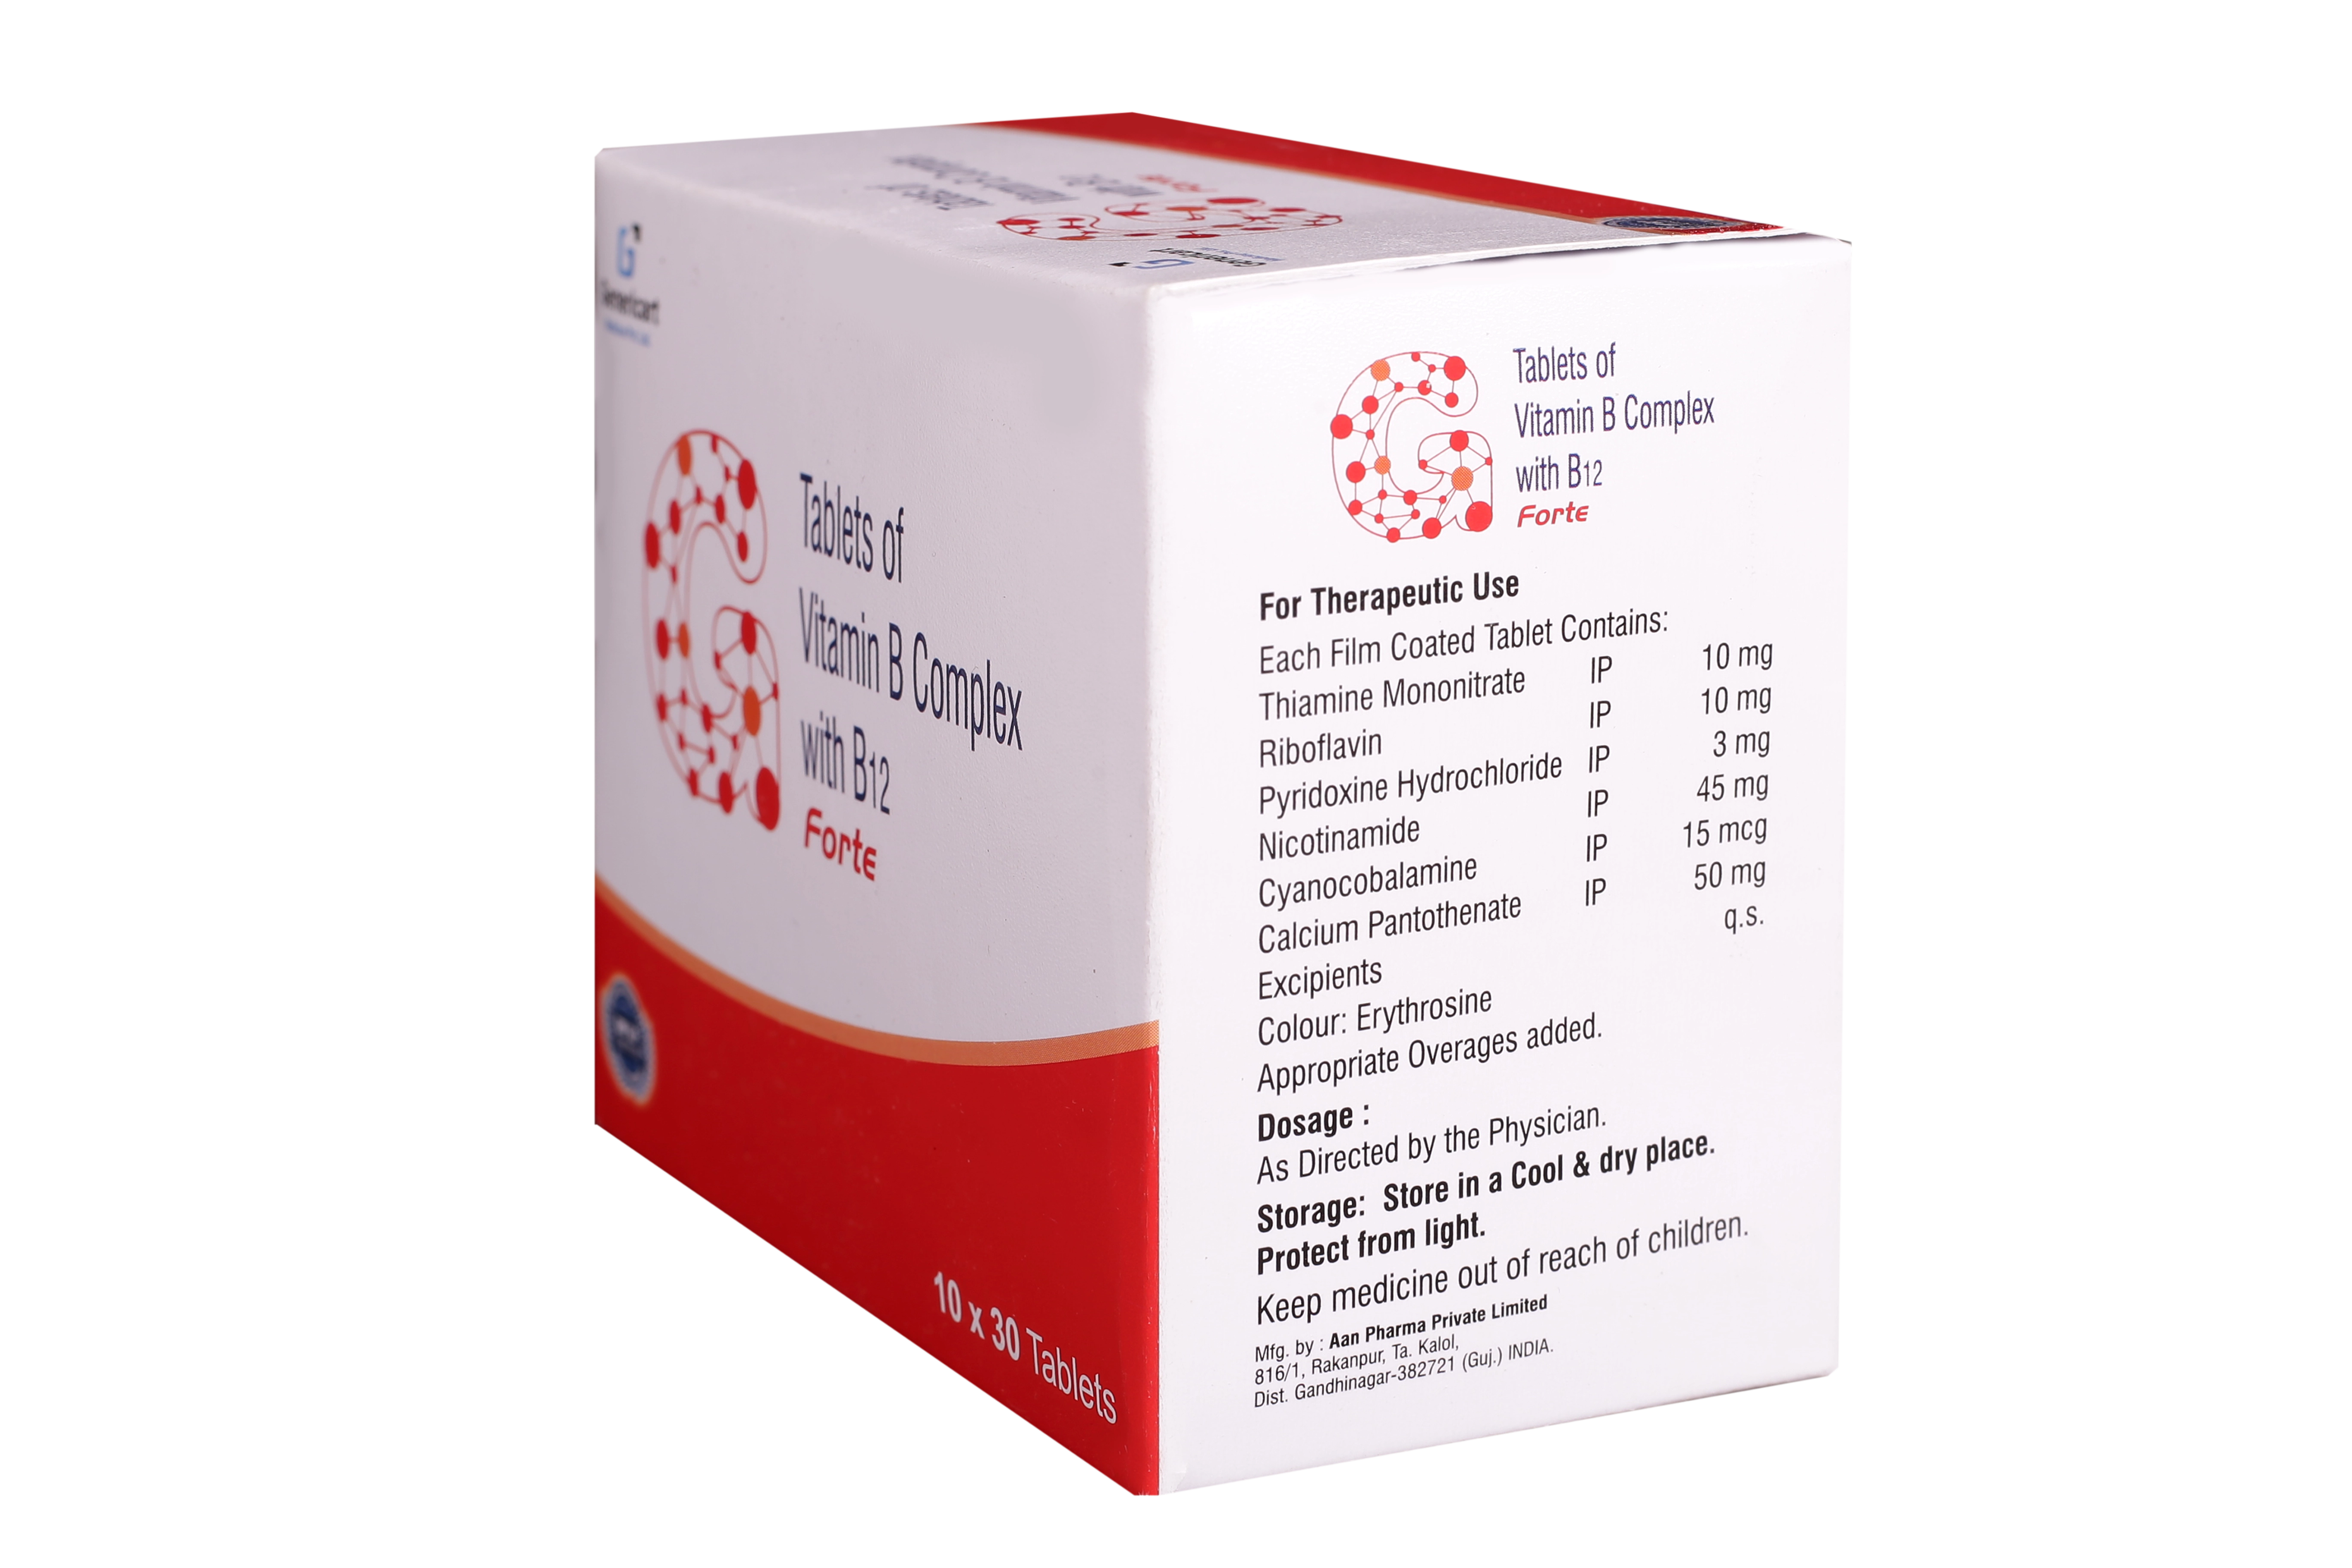 VITAMIN B COMPLEX WITH B12 - Genericart Products